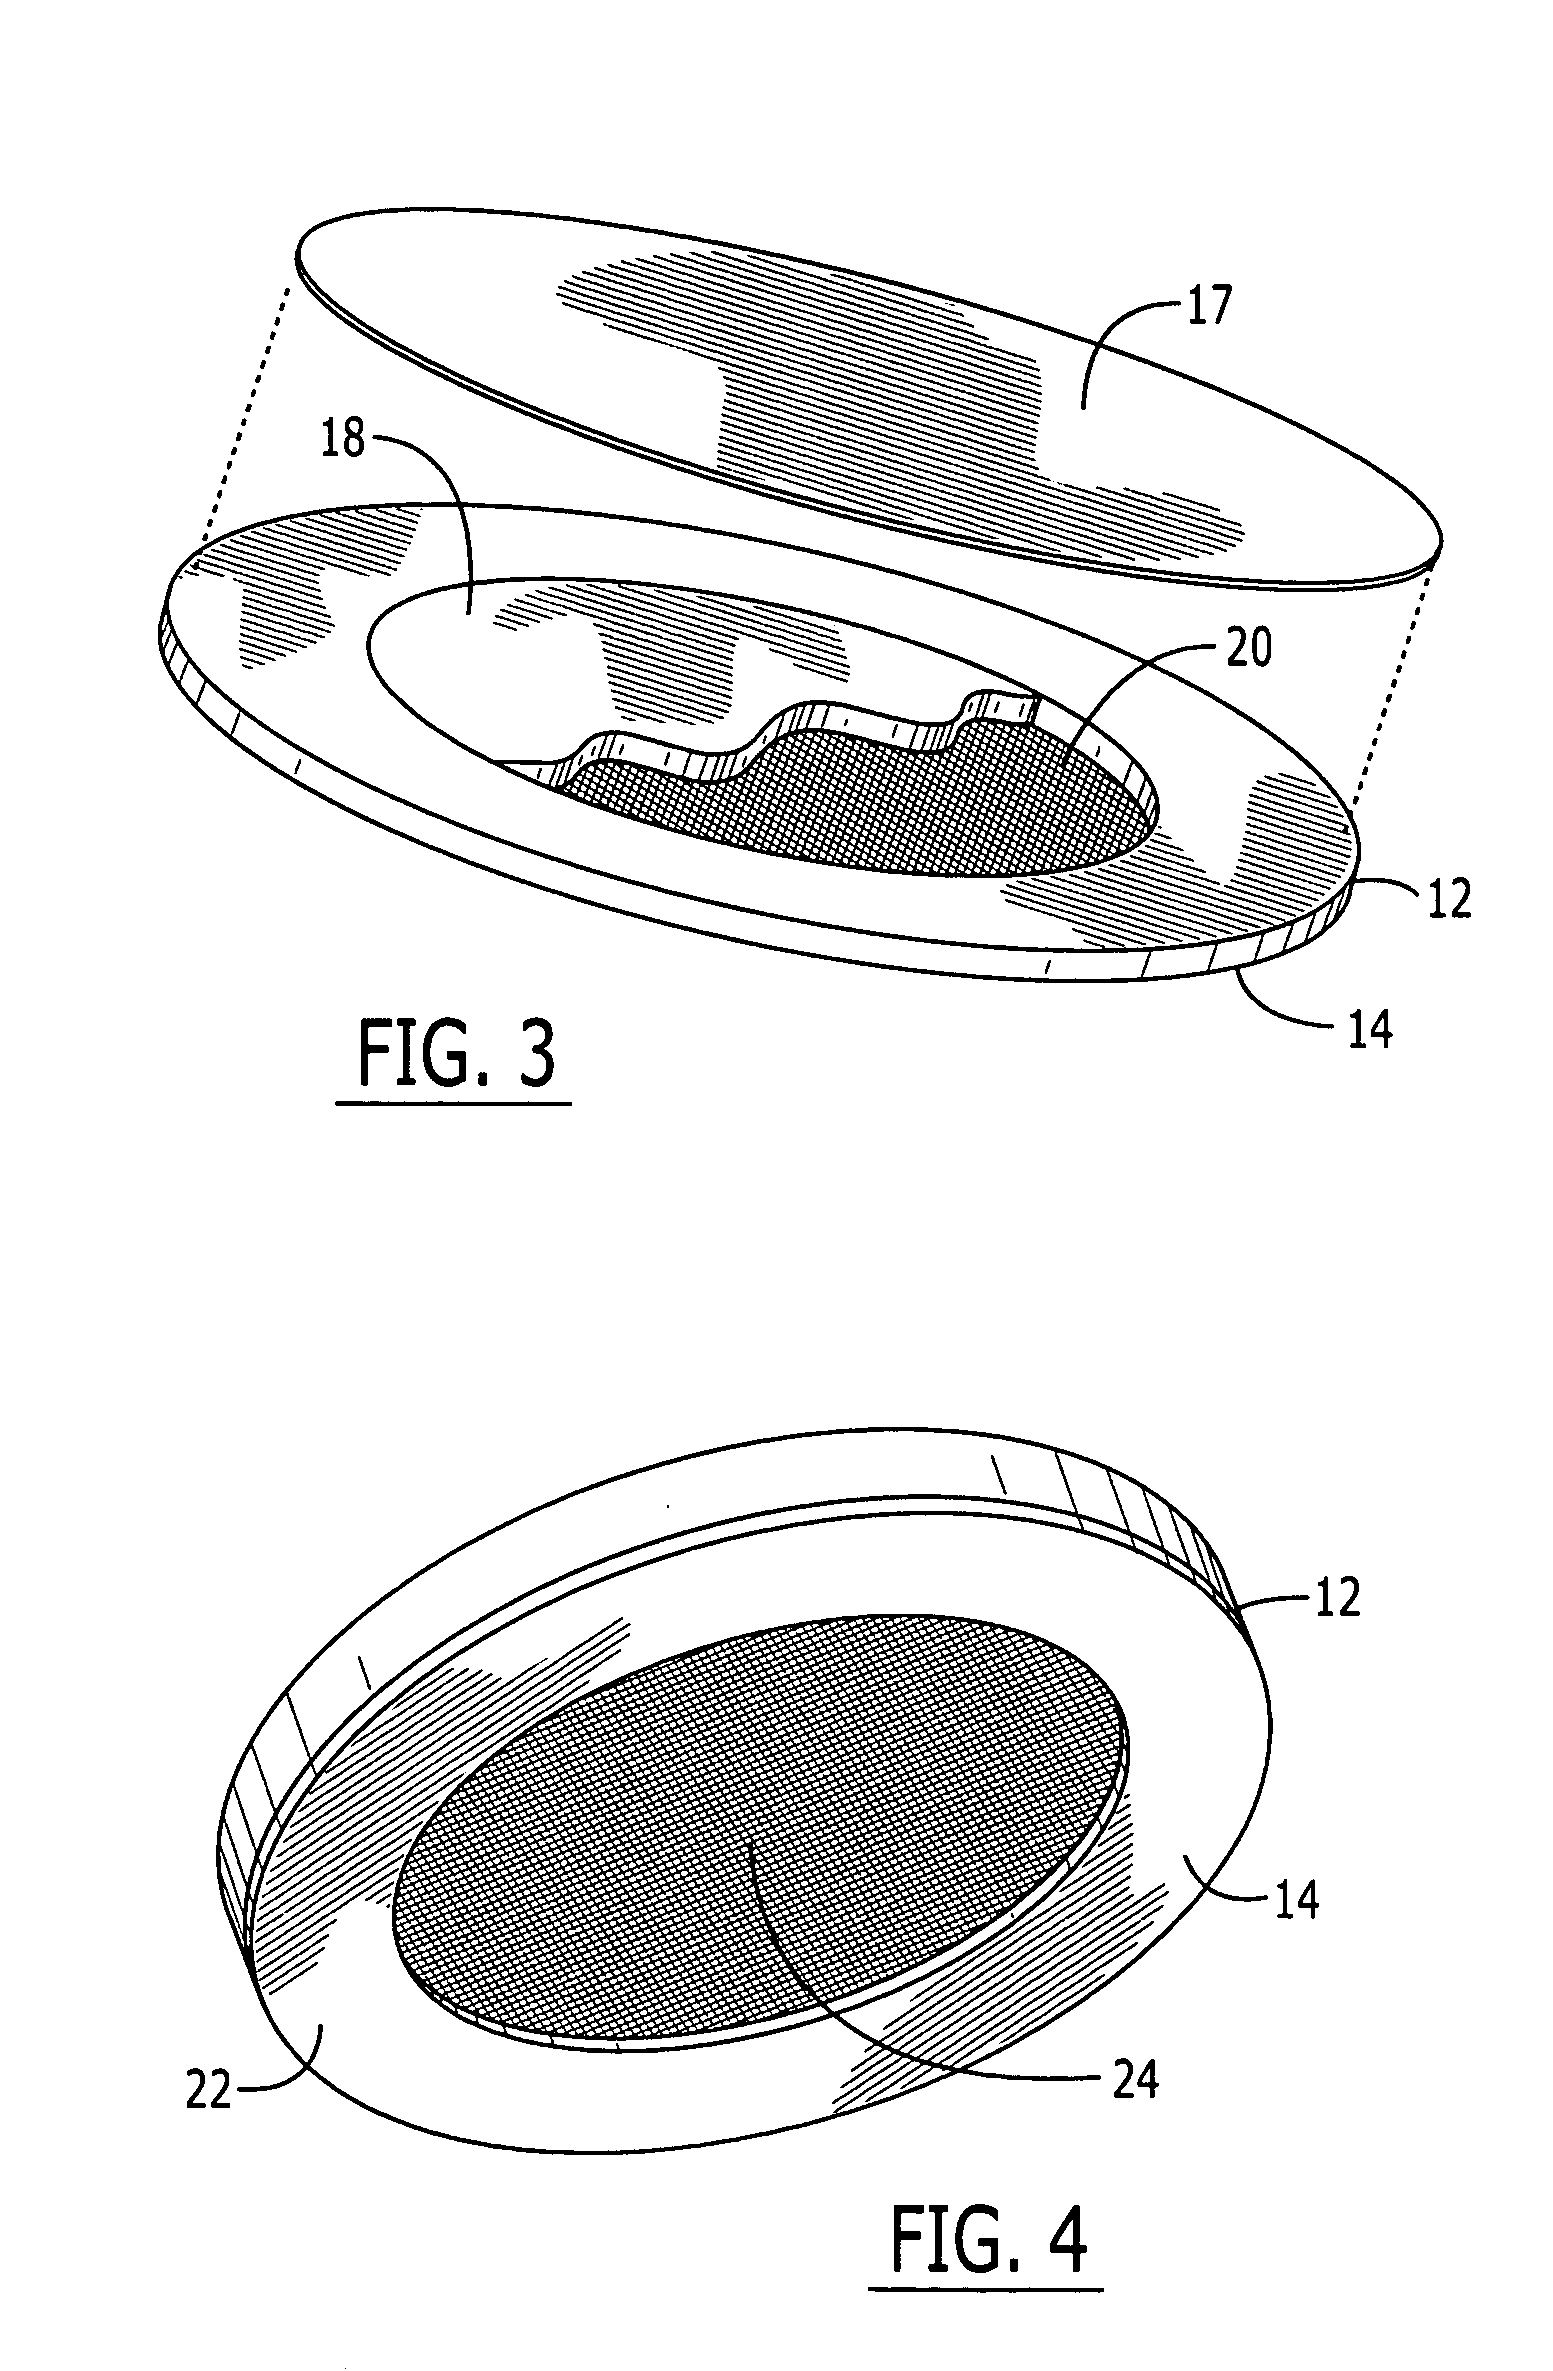 Apparatus and method for enhancing transdermal drug delivery